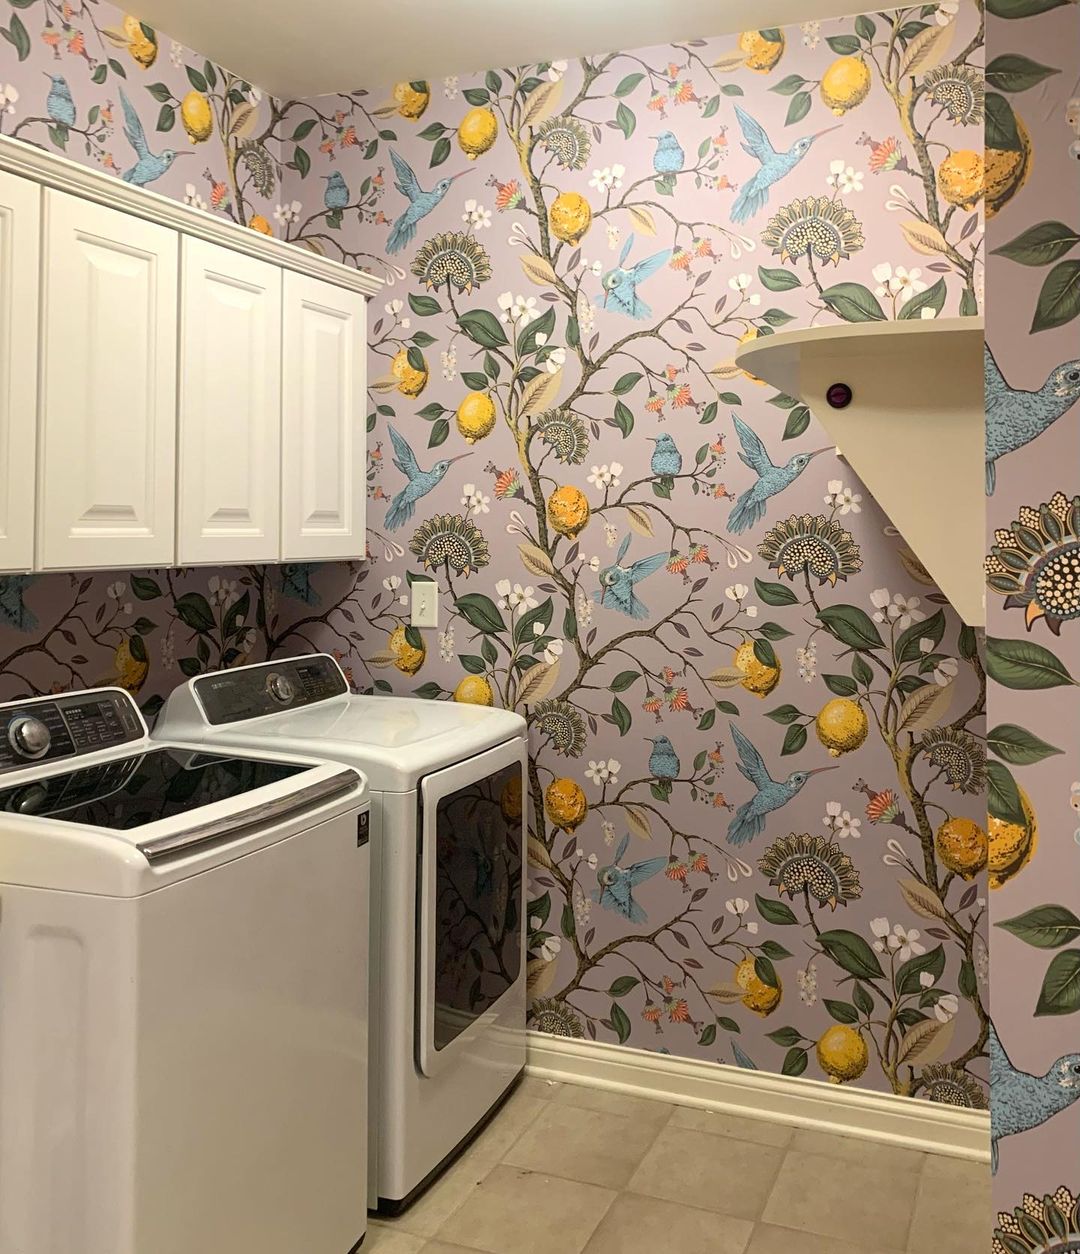 22. Whimsical Birds and Lemons for a Playful Laundry Room